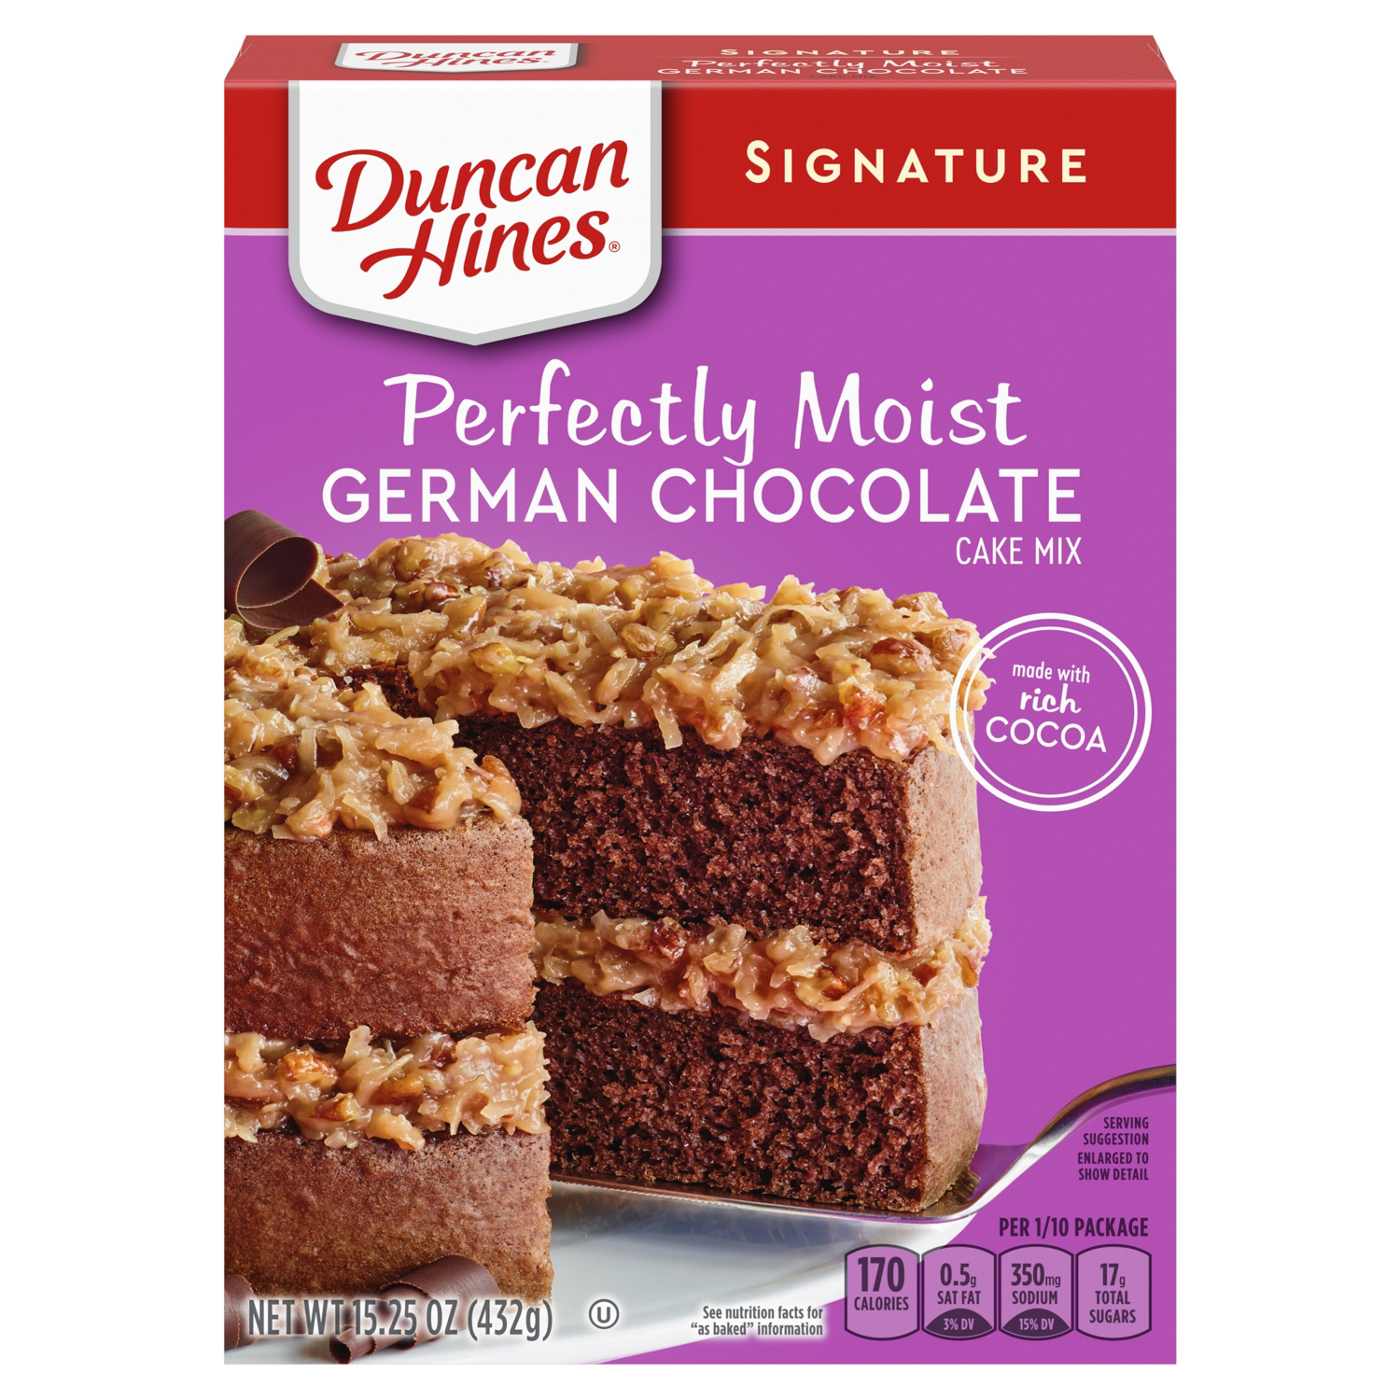 Duncan Hines Signature Perfectly Moist German Chocolate Cake Mix; image 1 of 7